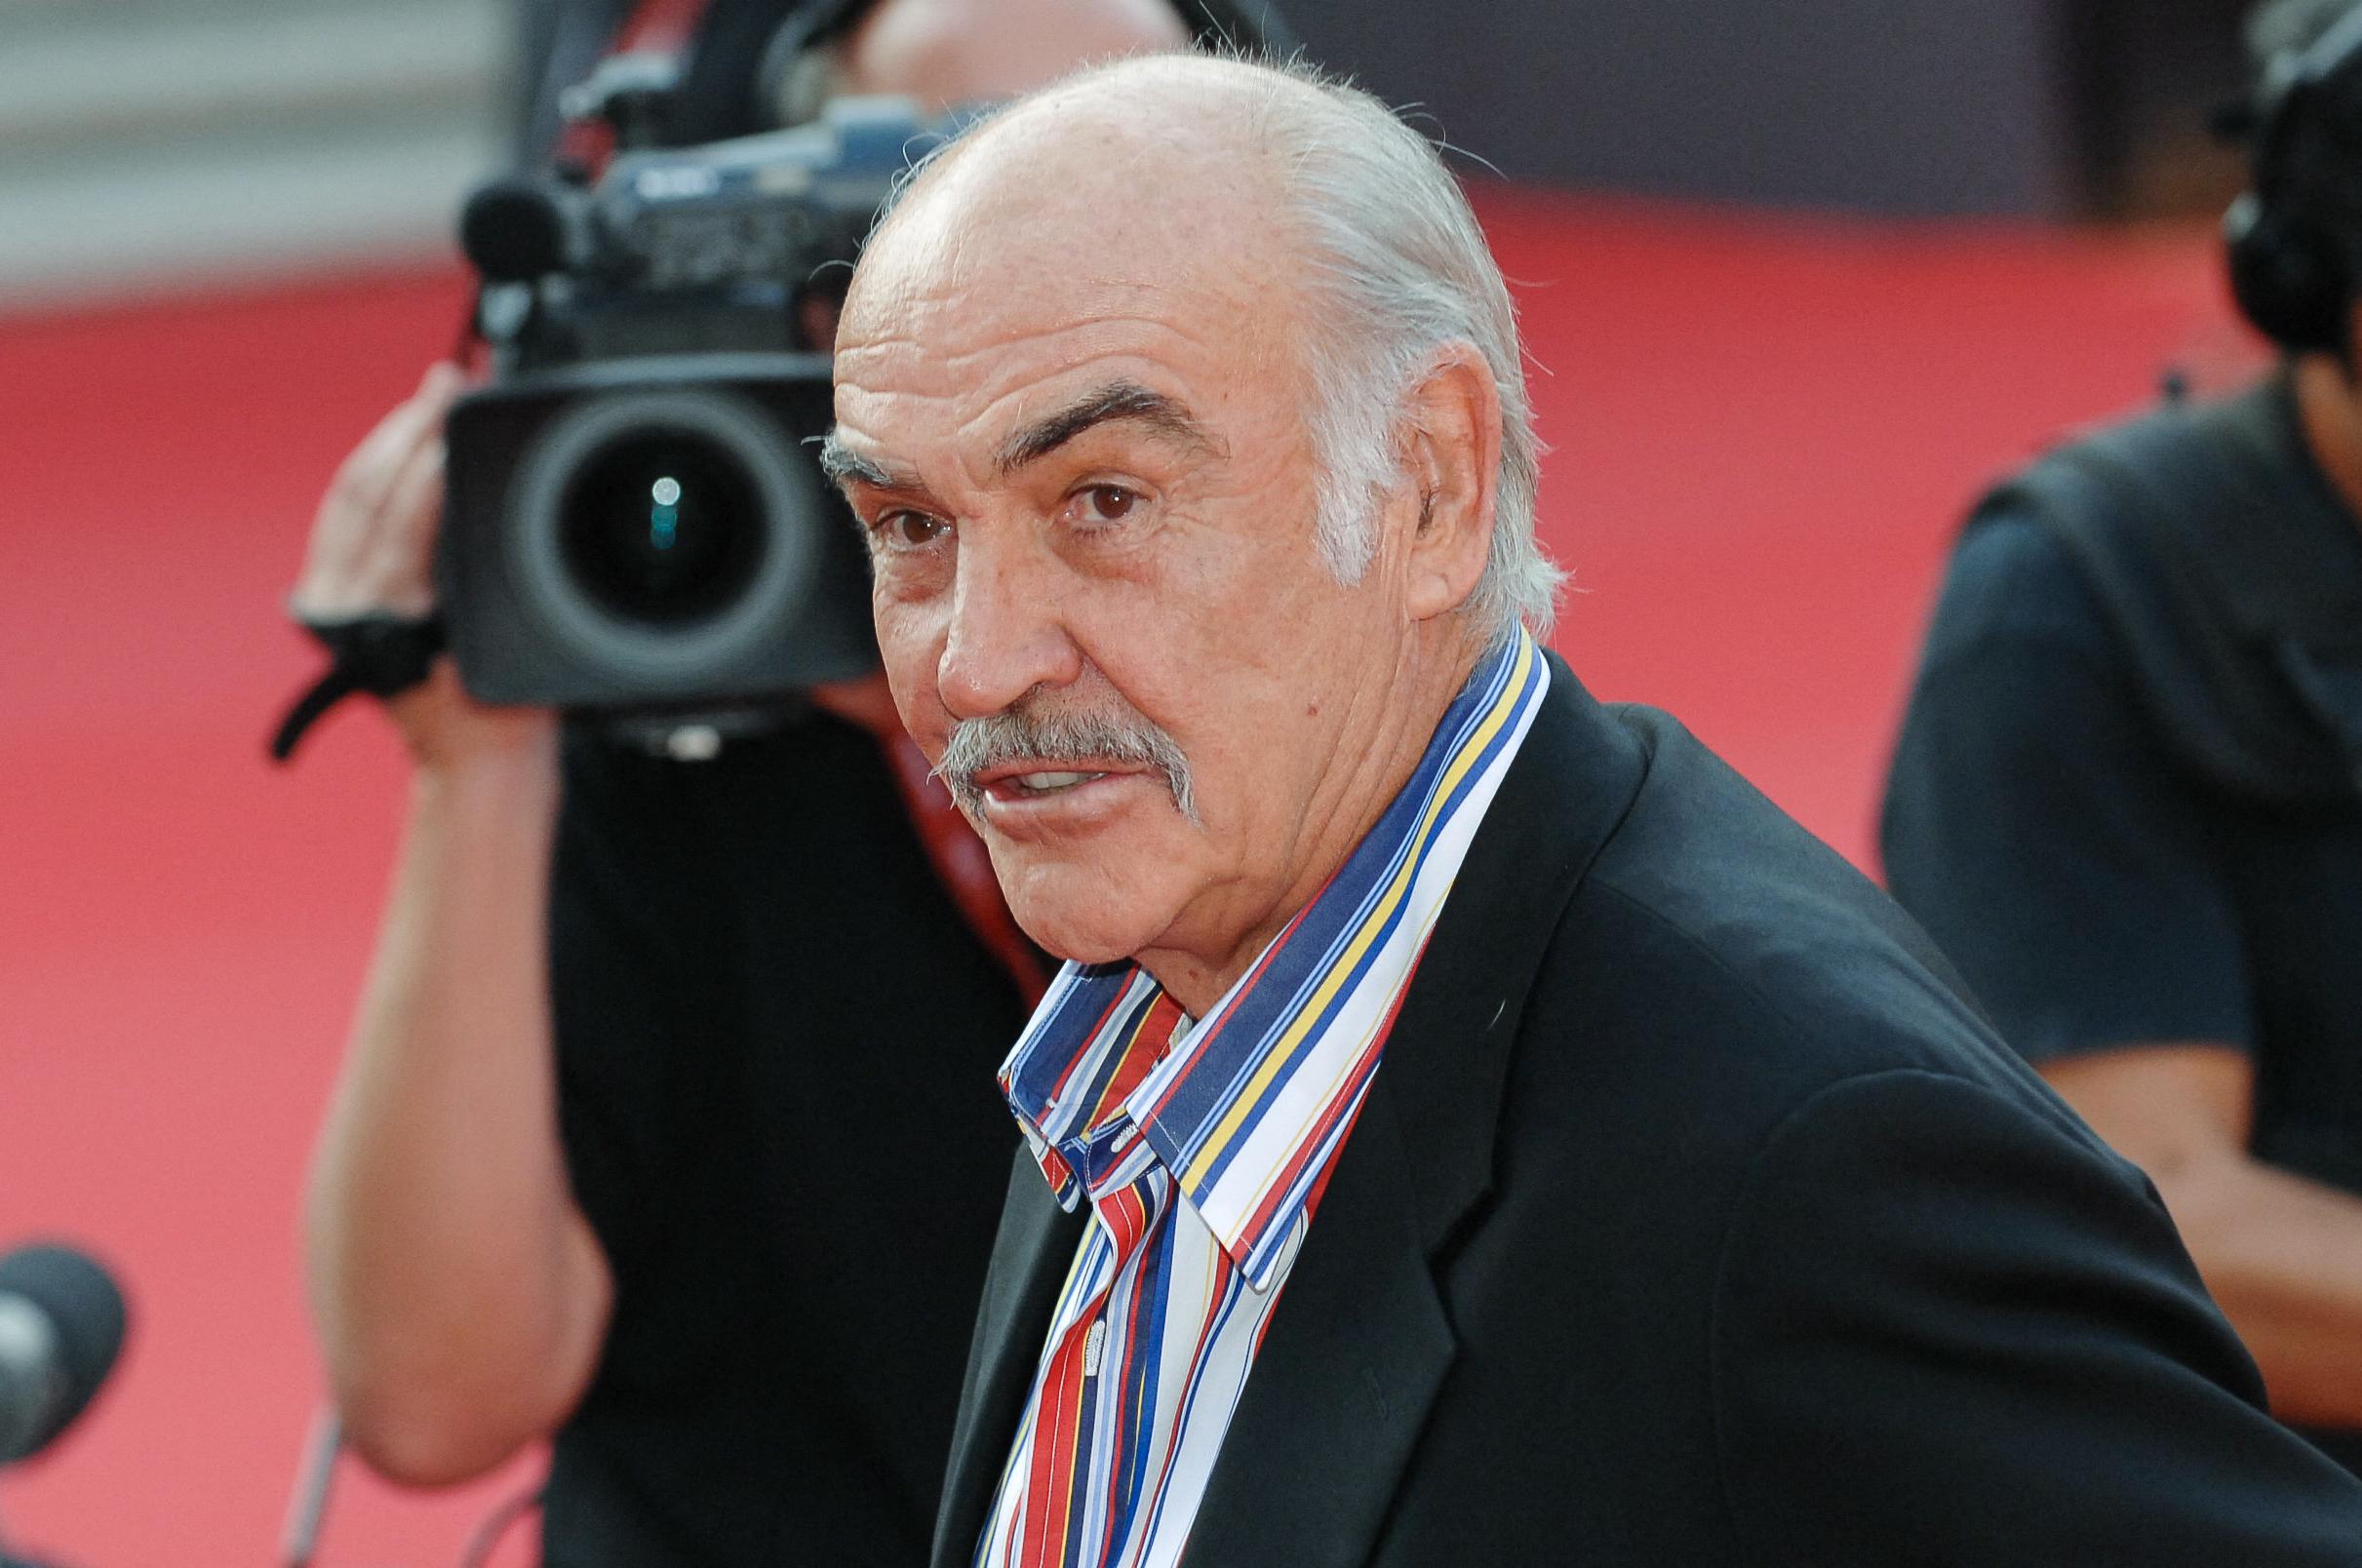 Sean Connery's Shocking Remarks on Slapping Women Resurface